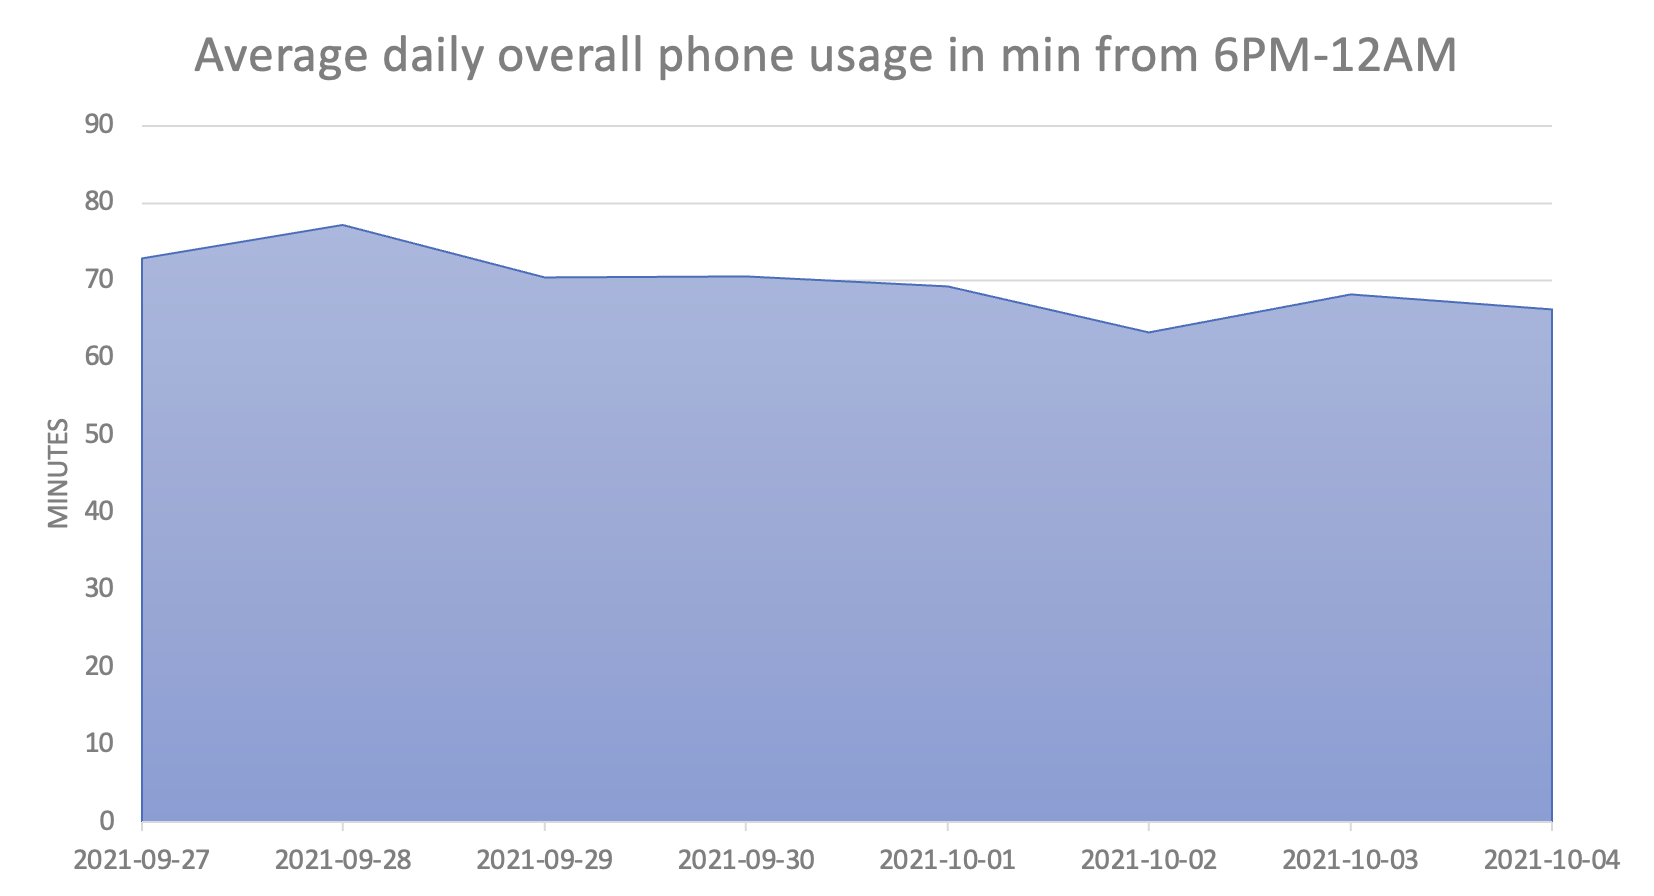 Average daily phone usage in minutes from 6PM - 12AM